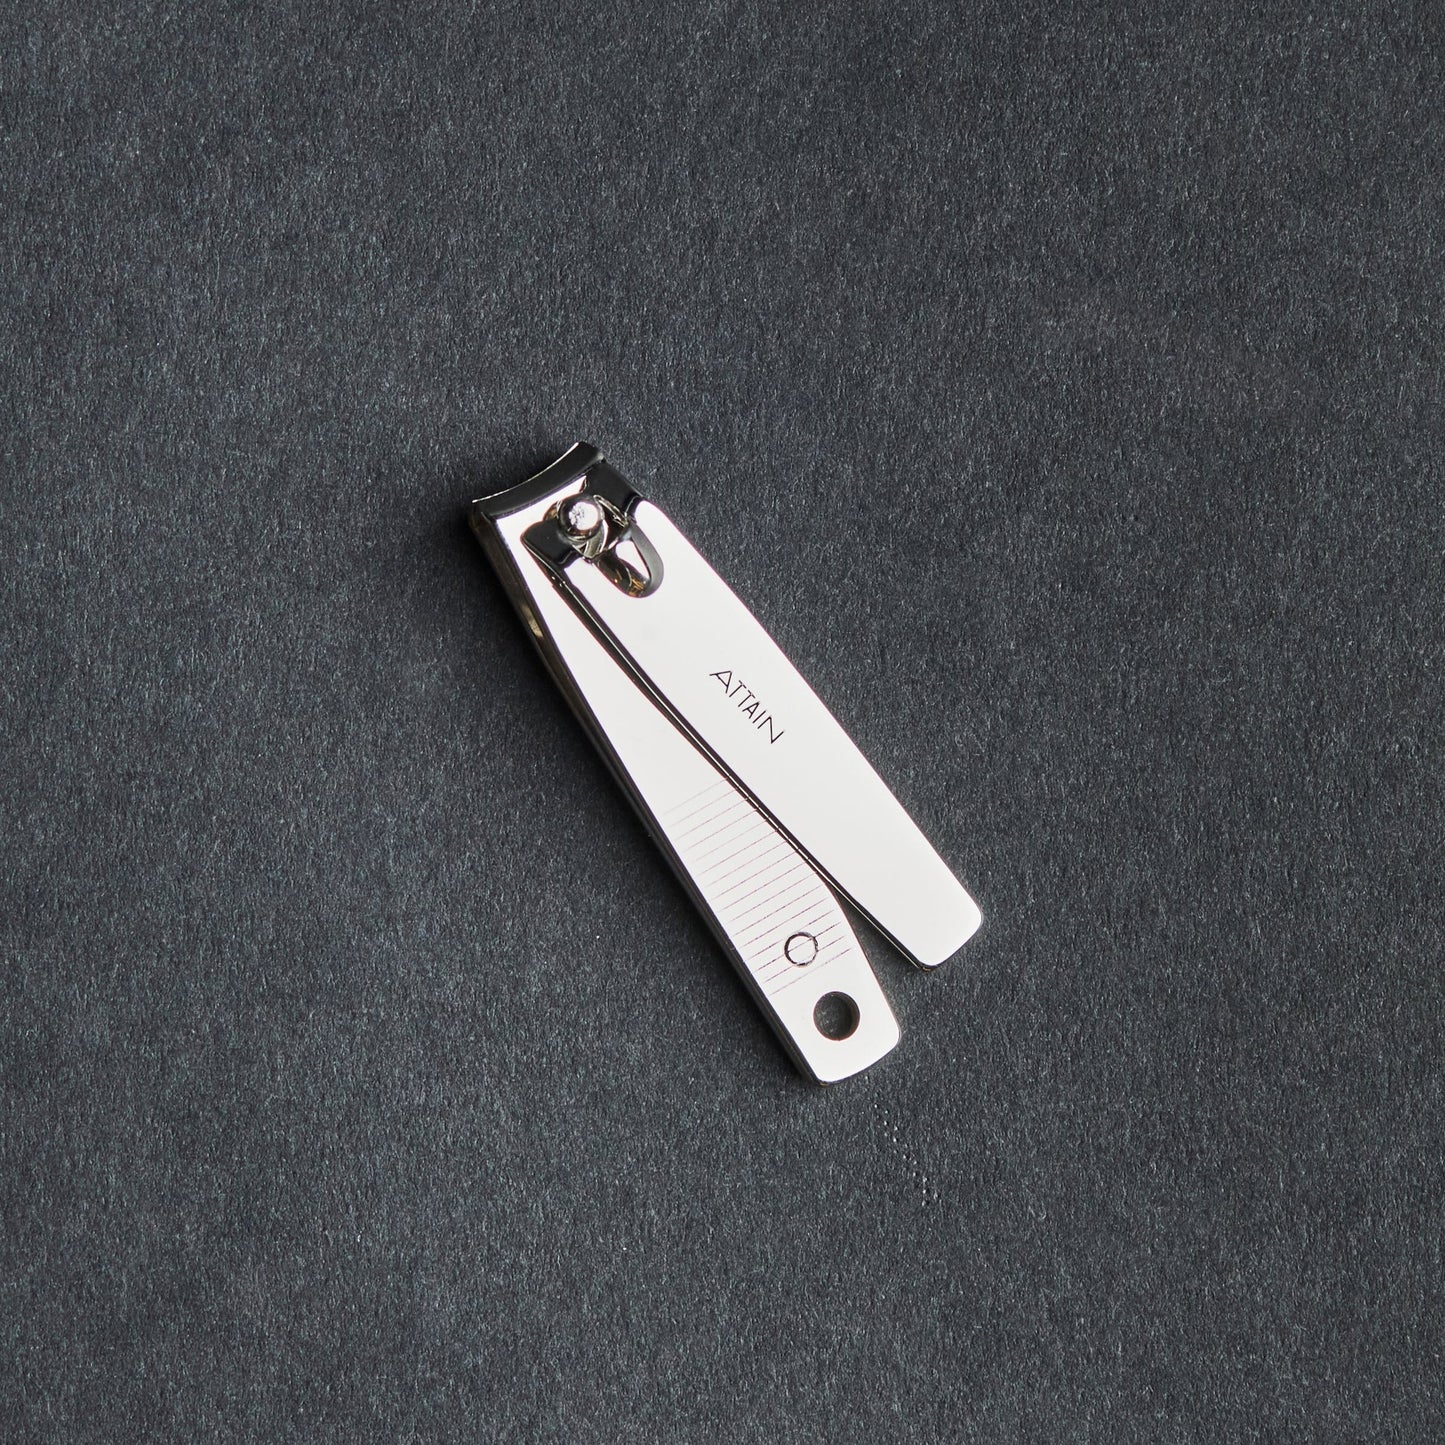 Attain Strength Nail Clippers